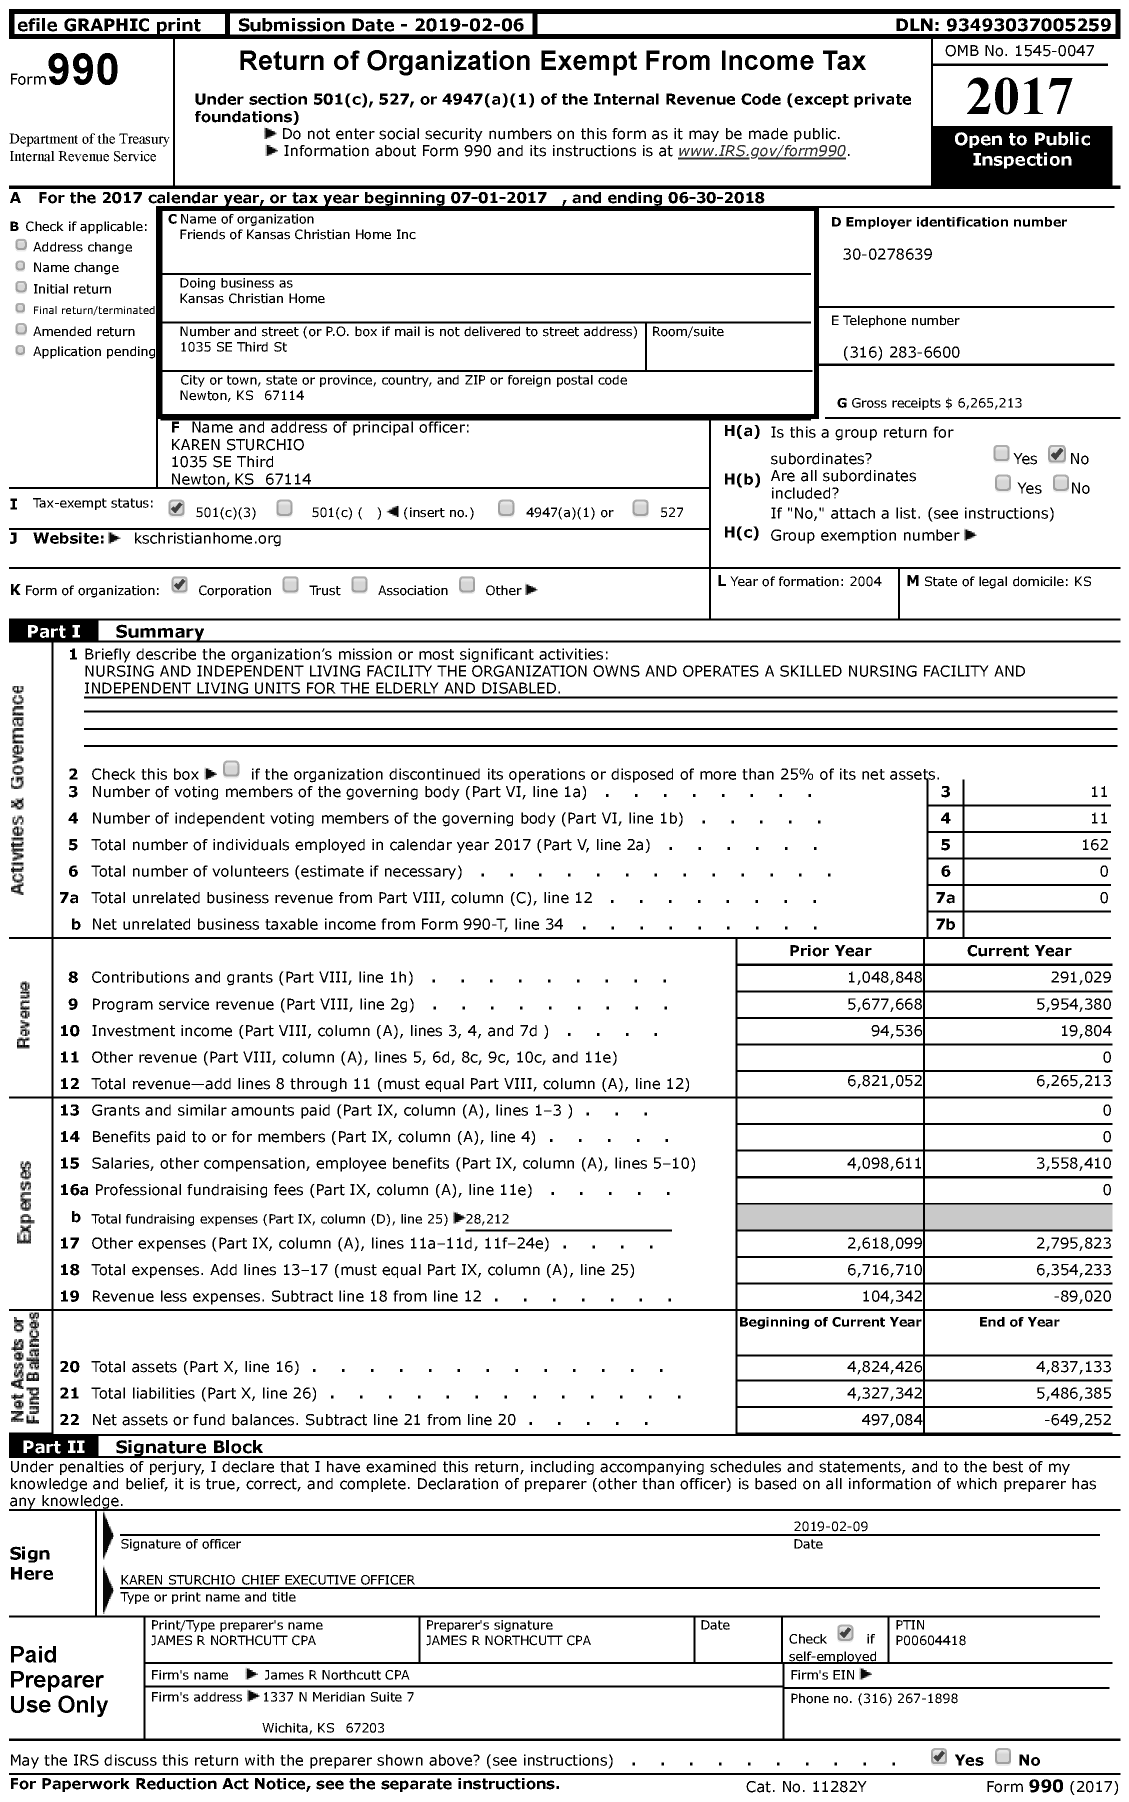 Image of first page of 2017 Form 990 for Kansas Christian Home (KCH)